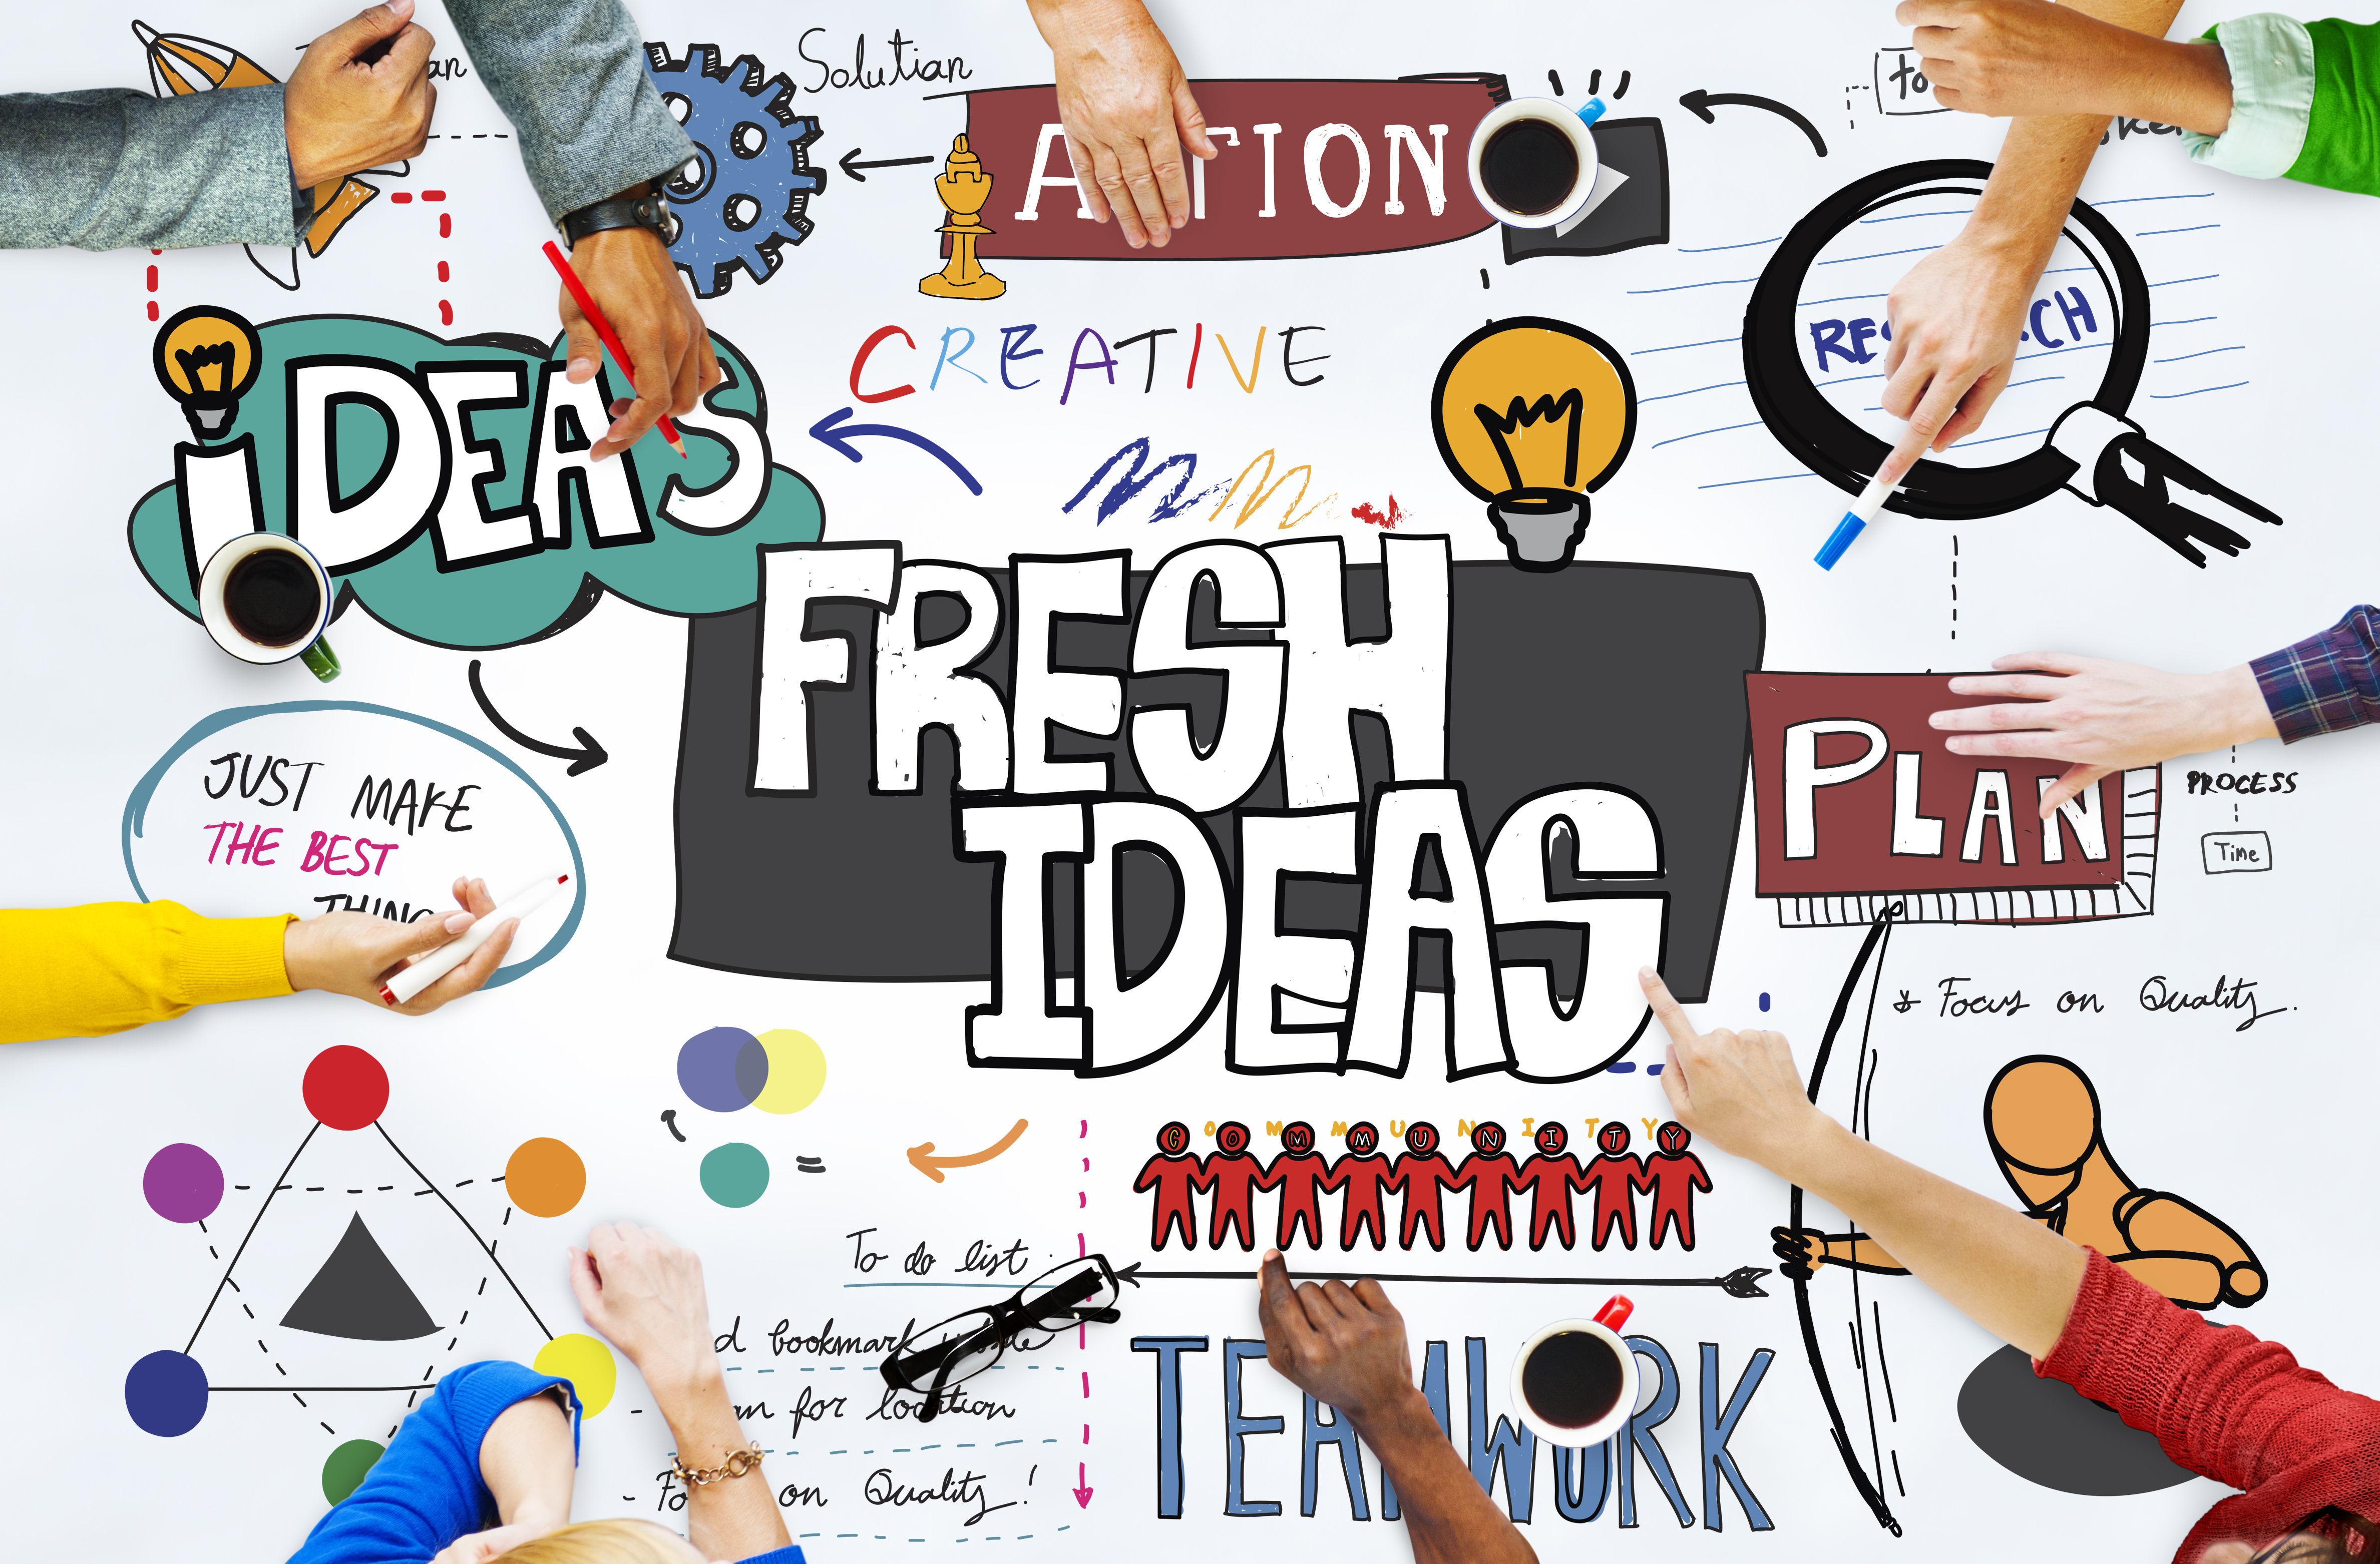 A white board surrounded by different sets of hands incorporates various drawings and phrases to portray the ideas of a creative office team, such as a light-bulb, magnifying glass, colorful diagrams, along with words like teamwork, fresh ideas, and plan.